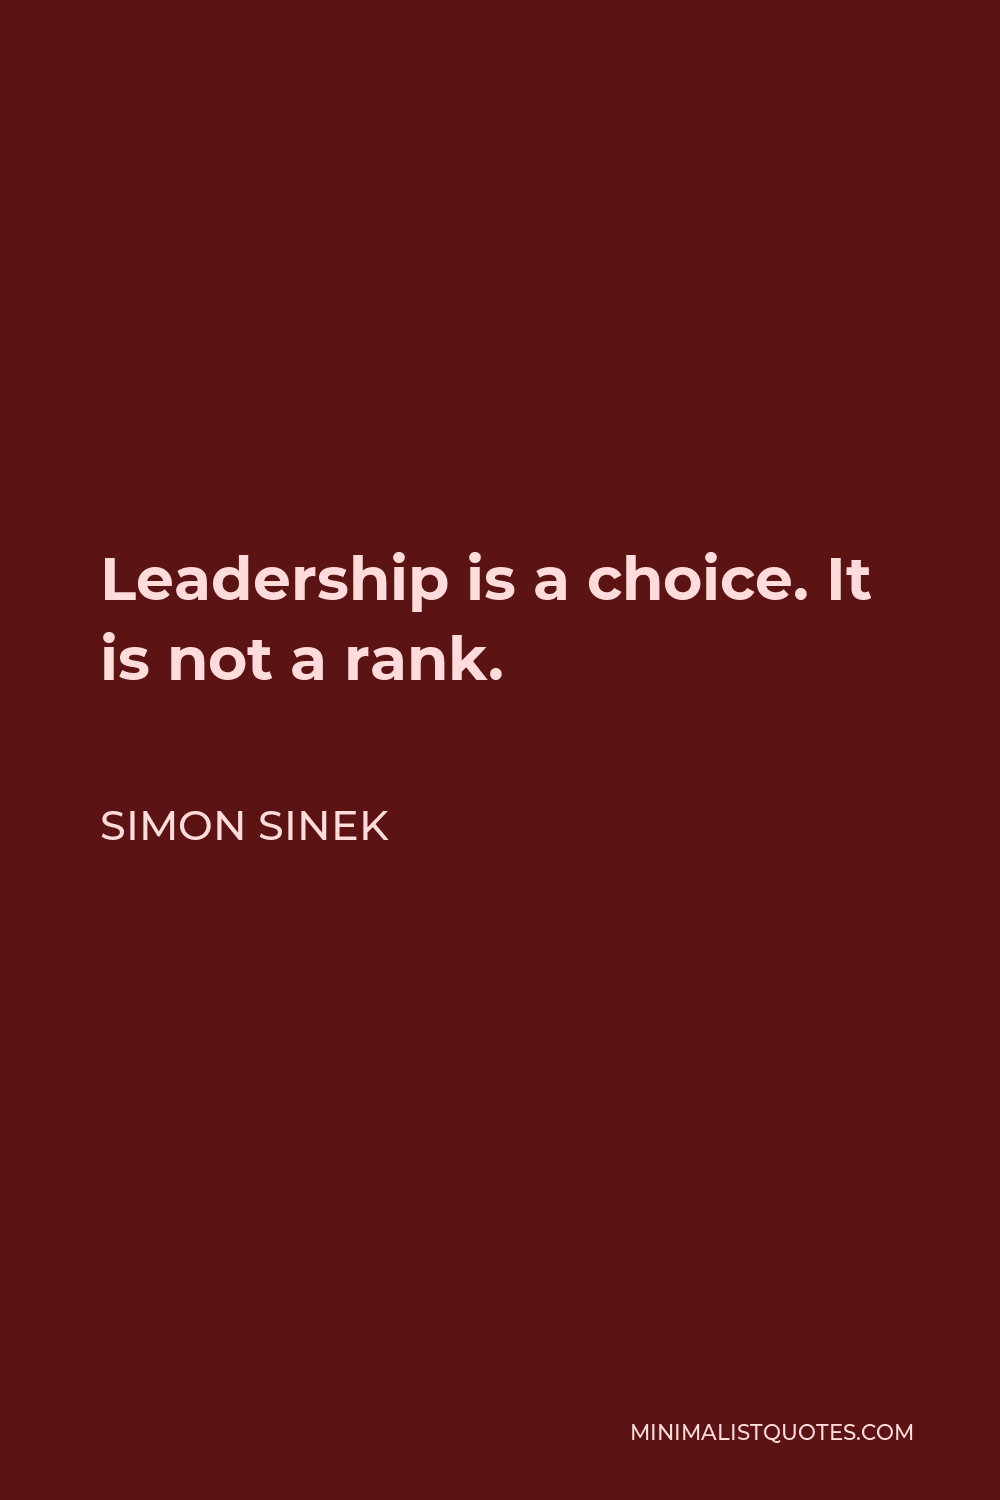 Simon Sinek Quote - Leadership is a choice. It is not a rank.